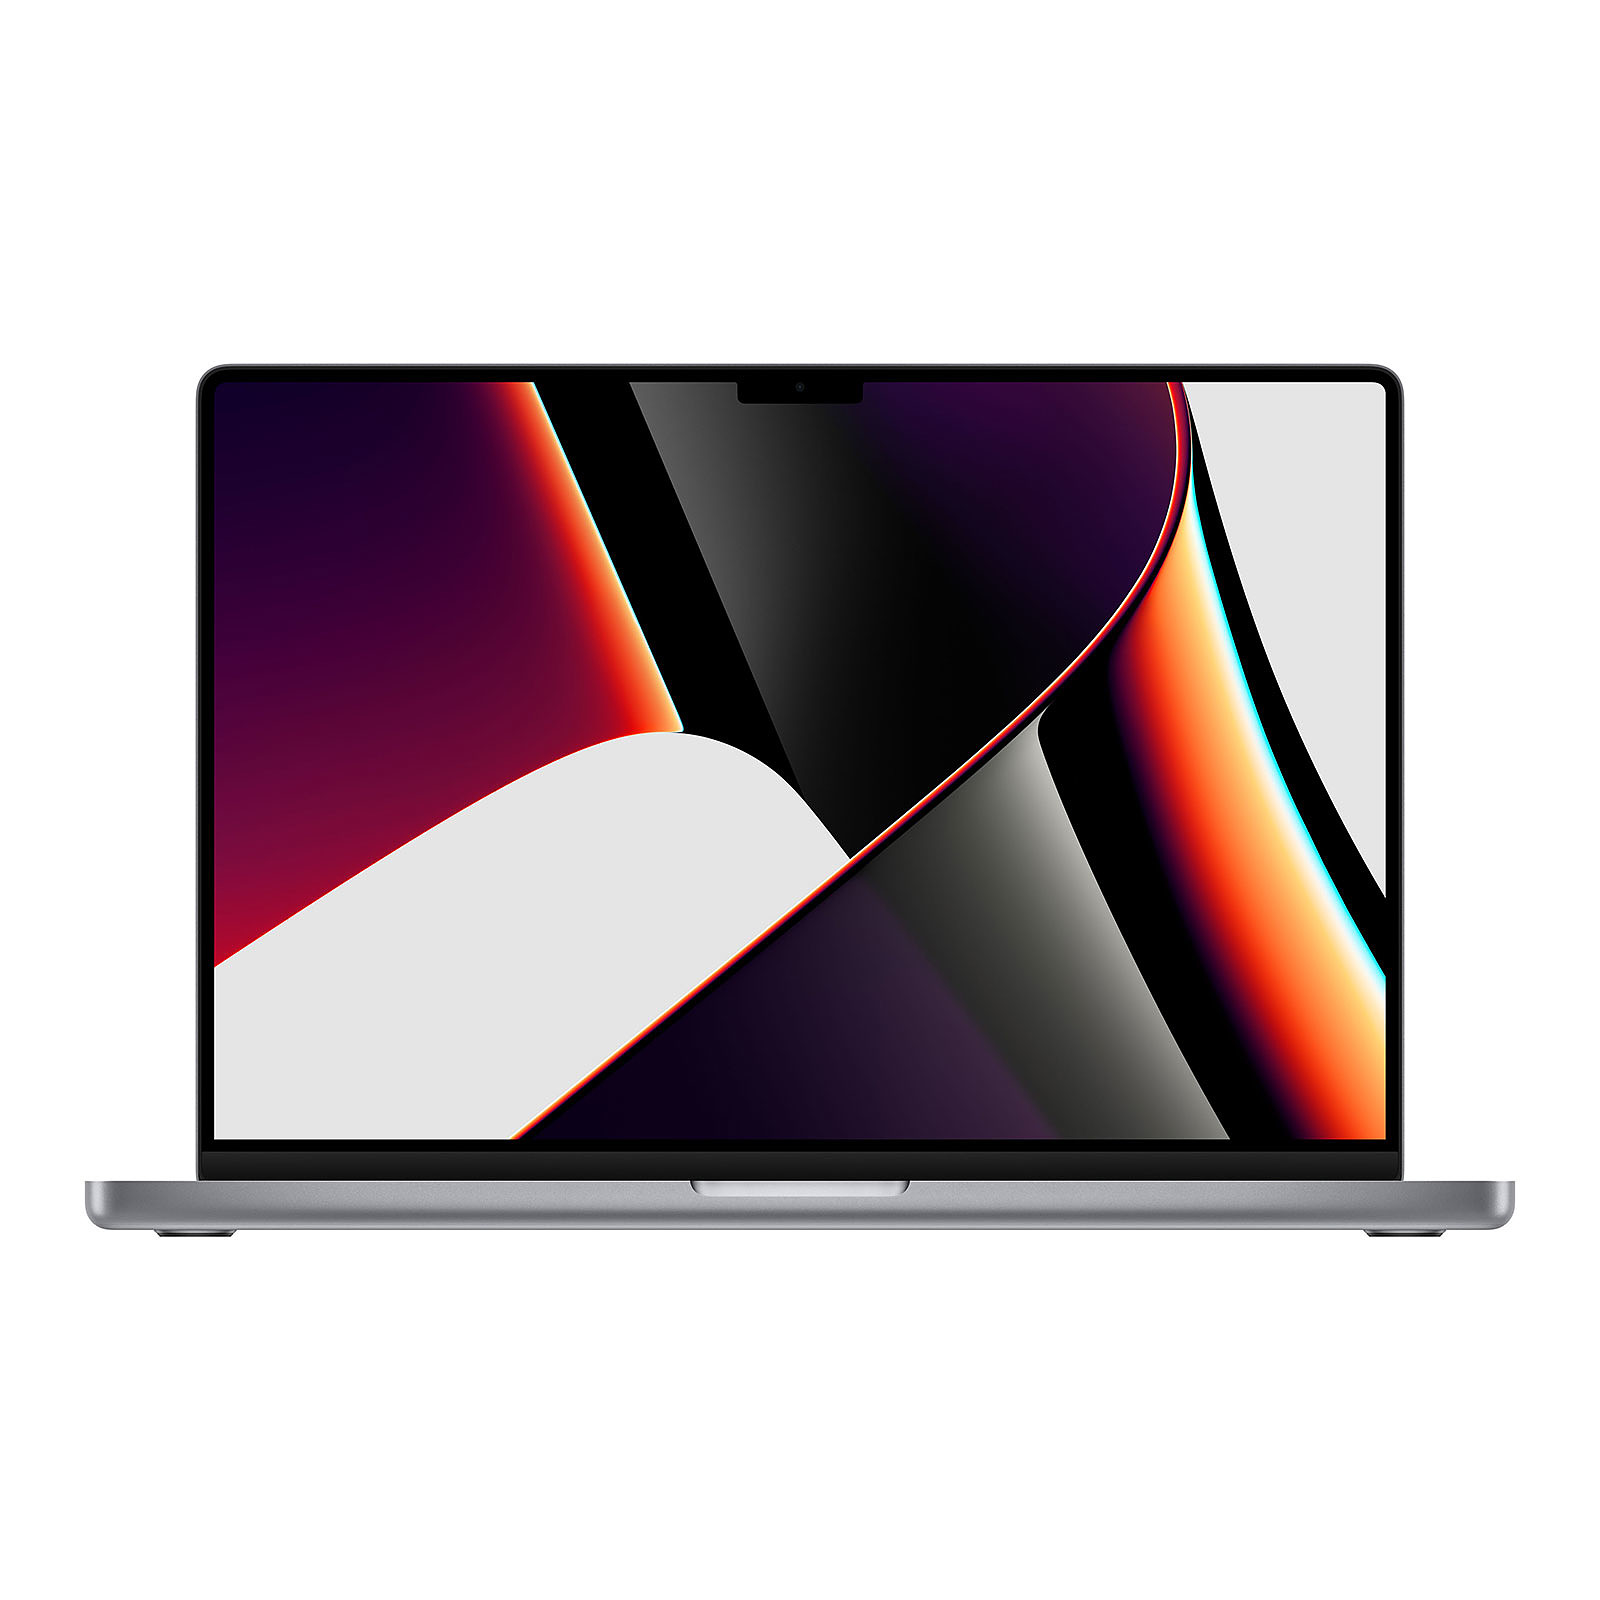 Apple MacBook Pro M1 Pro (2021) 16" Gris sideral 16Go/1To (MK193FN/A) - MacBook Apple